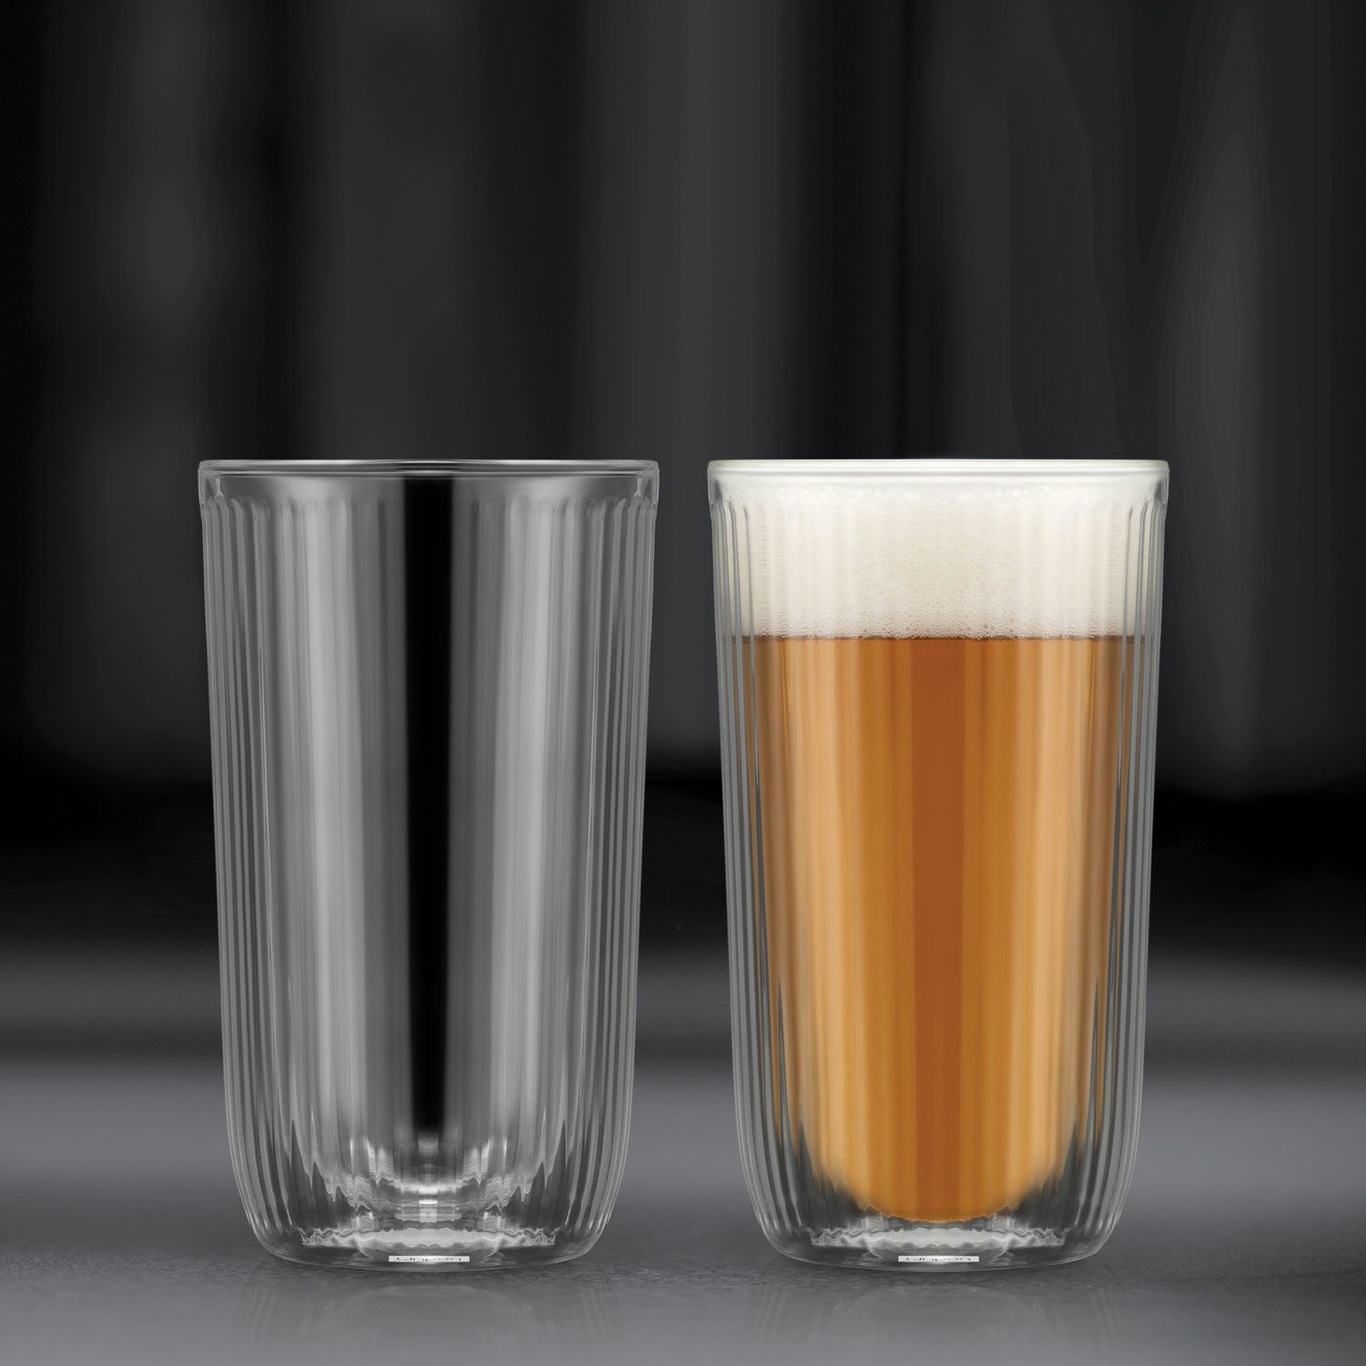 https://royaldesign.com/image/2/bodum-douro-double-walled-beer-glasses-2-pack-45-cl-2?w=800&quality=80